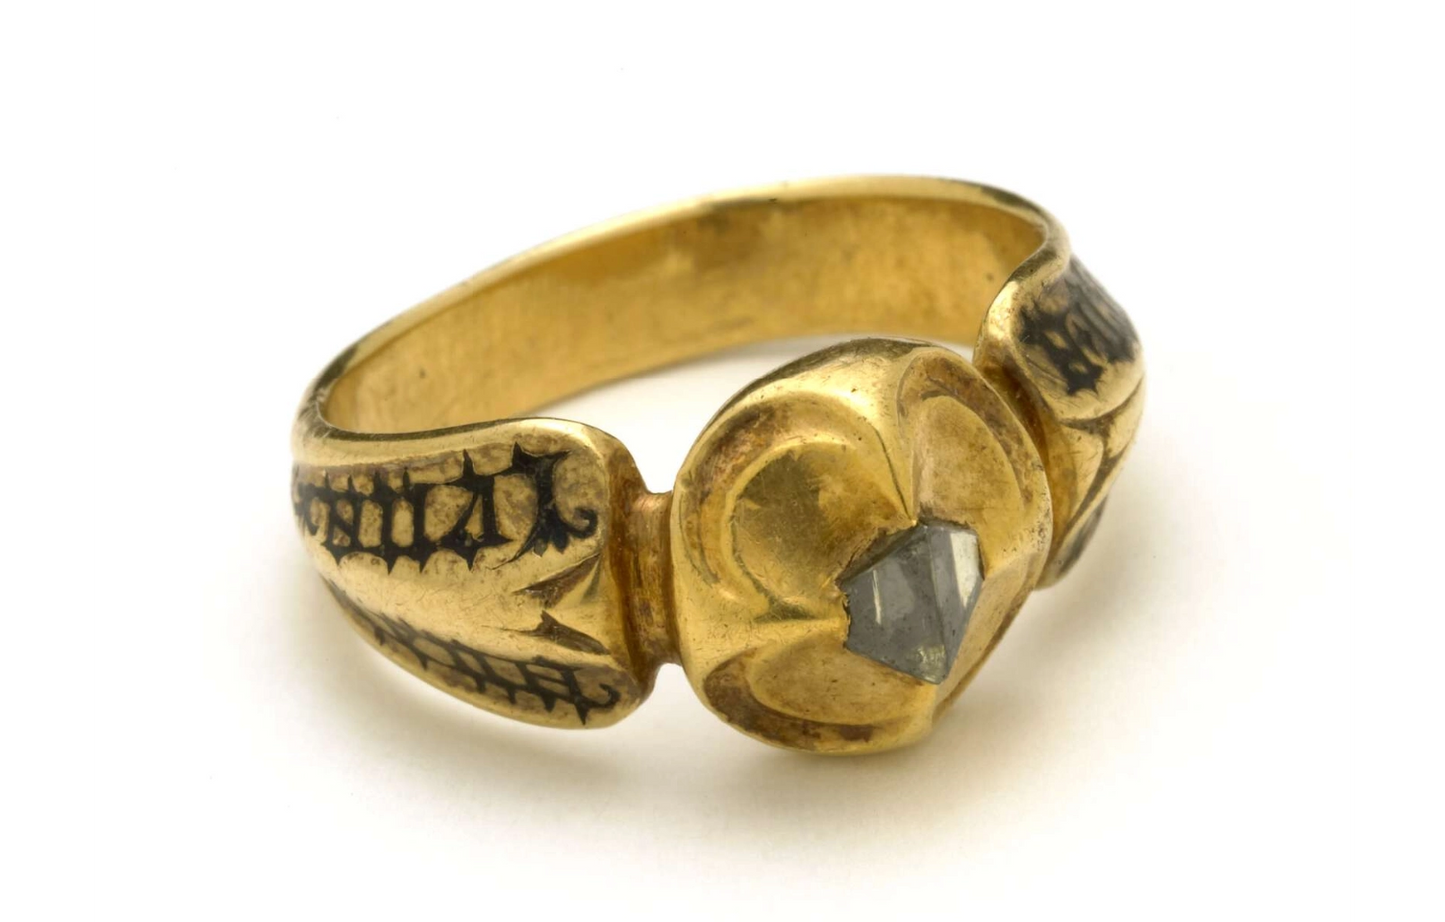 15th Century Quatrefoil Ring From Italy